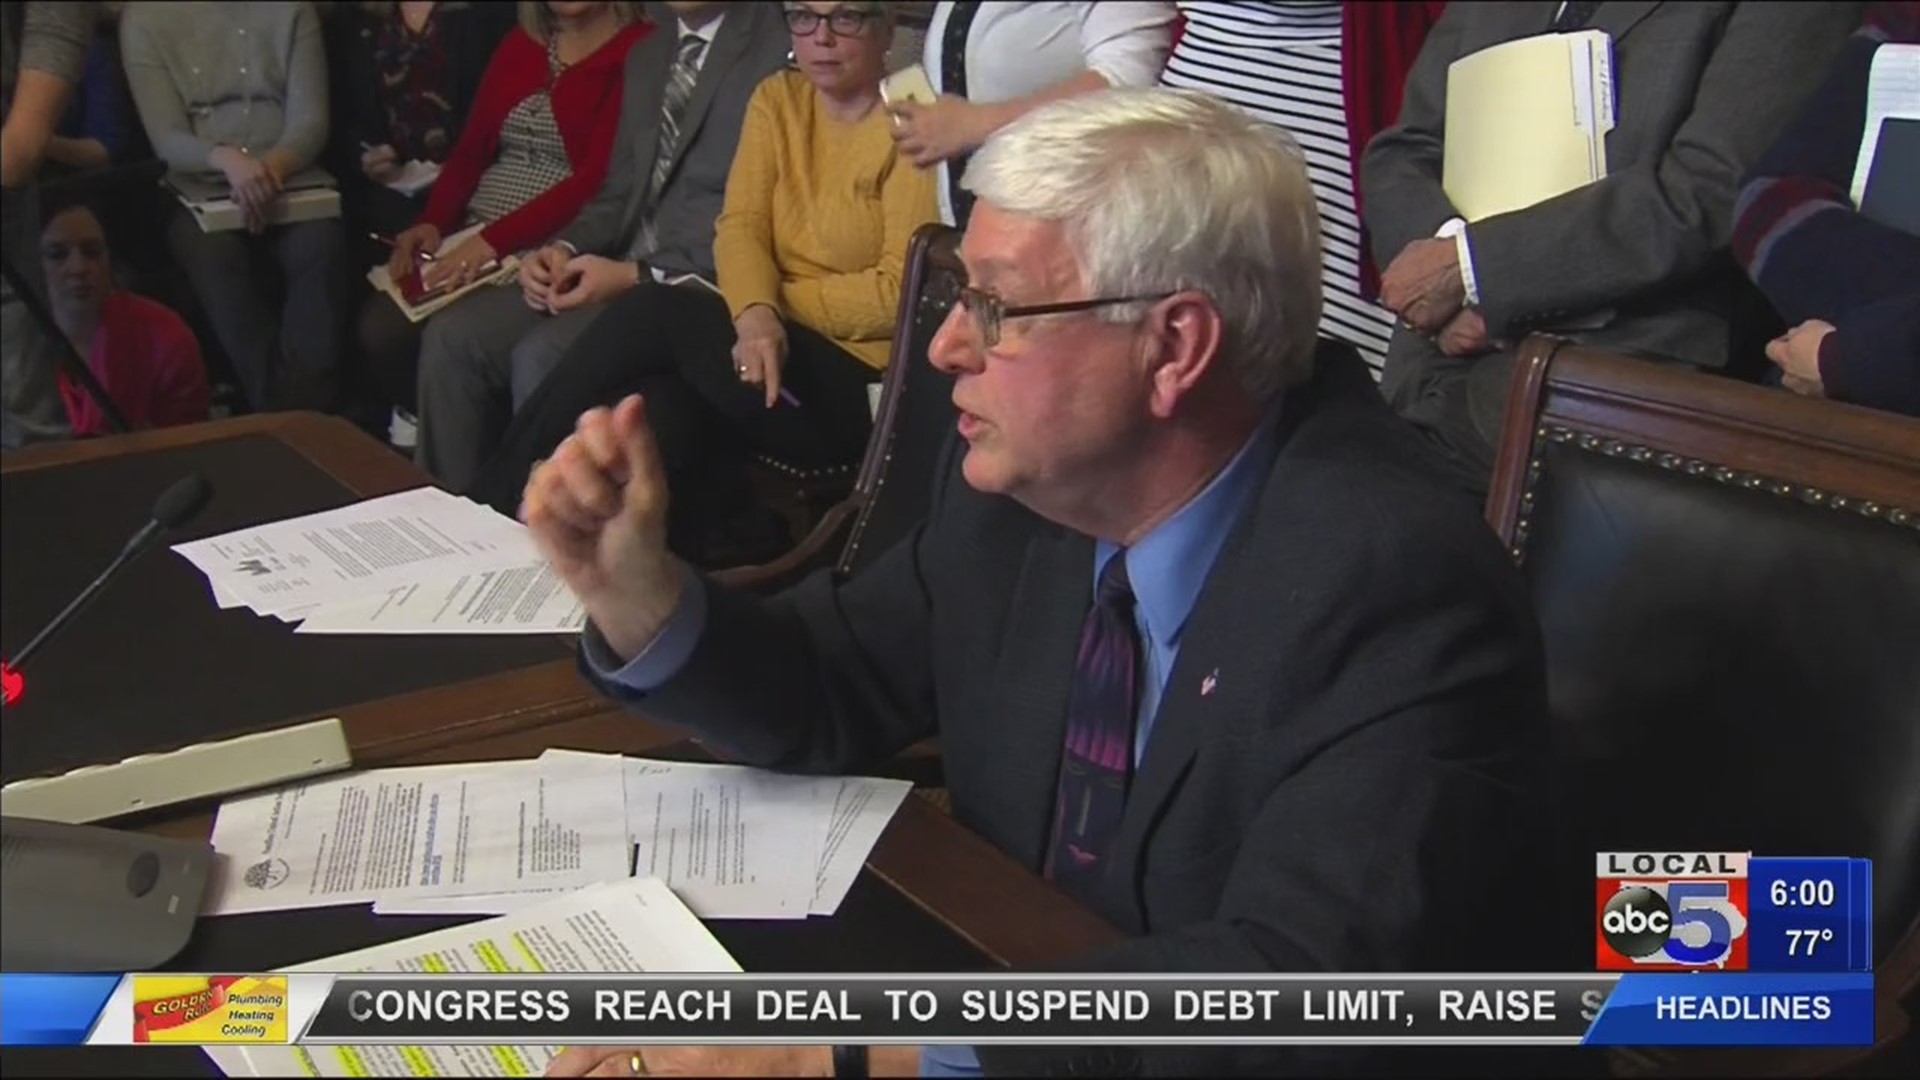 Oversight Committee requested on Foxhoven's resignation